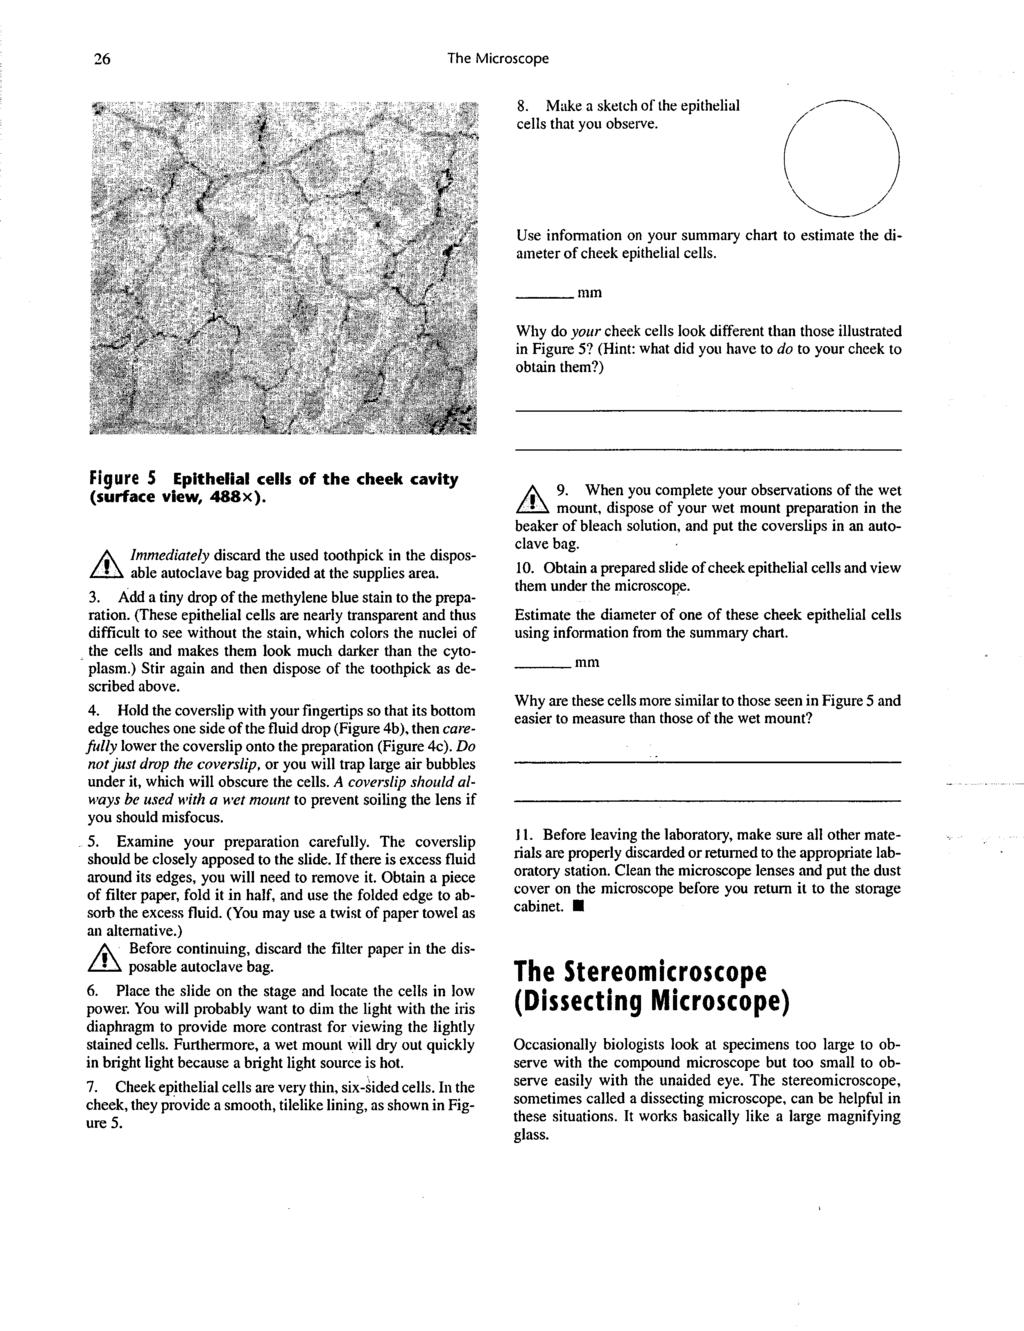 26 The Microscope 8. Make a sketch of the epithelial cells that you observe. Use information on your summary chart to estimate the diameter ofcheek epithelial cells.